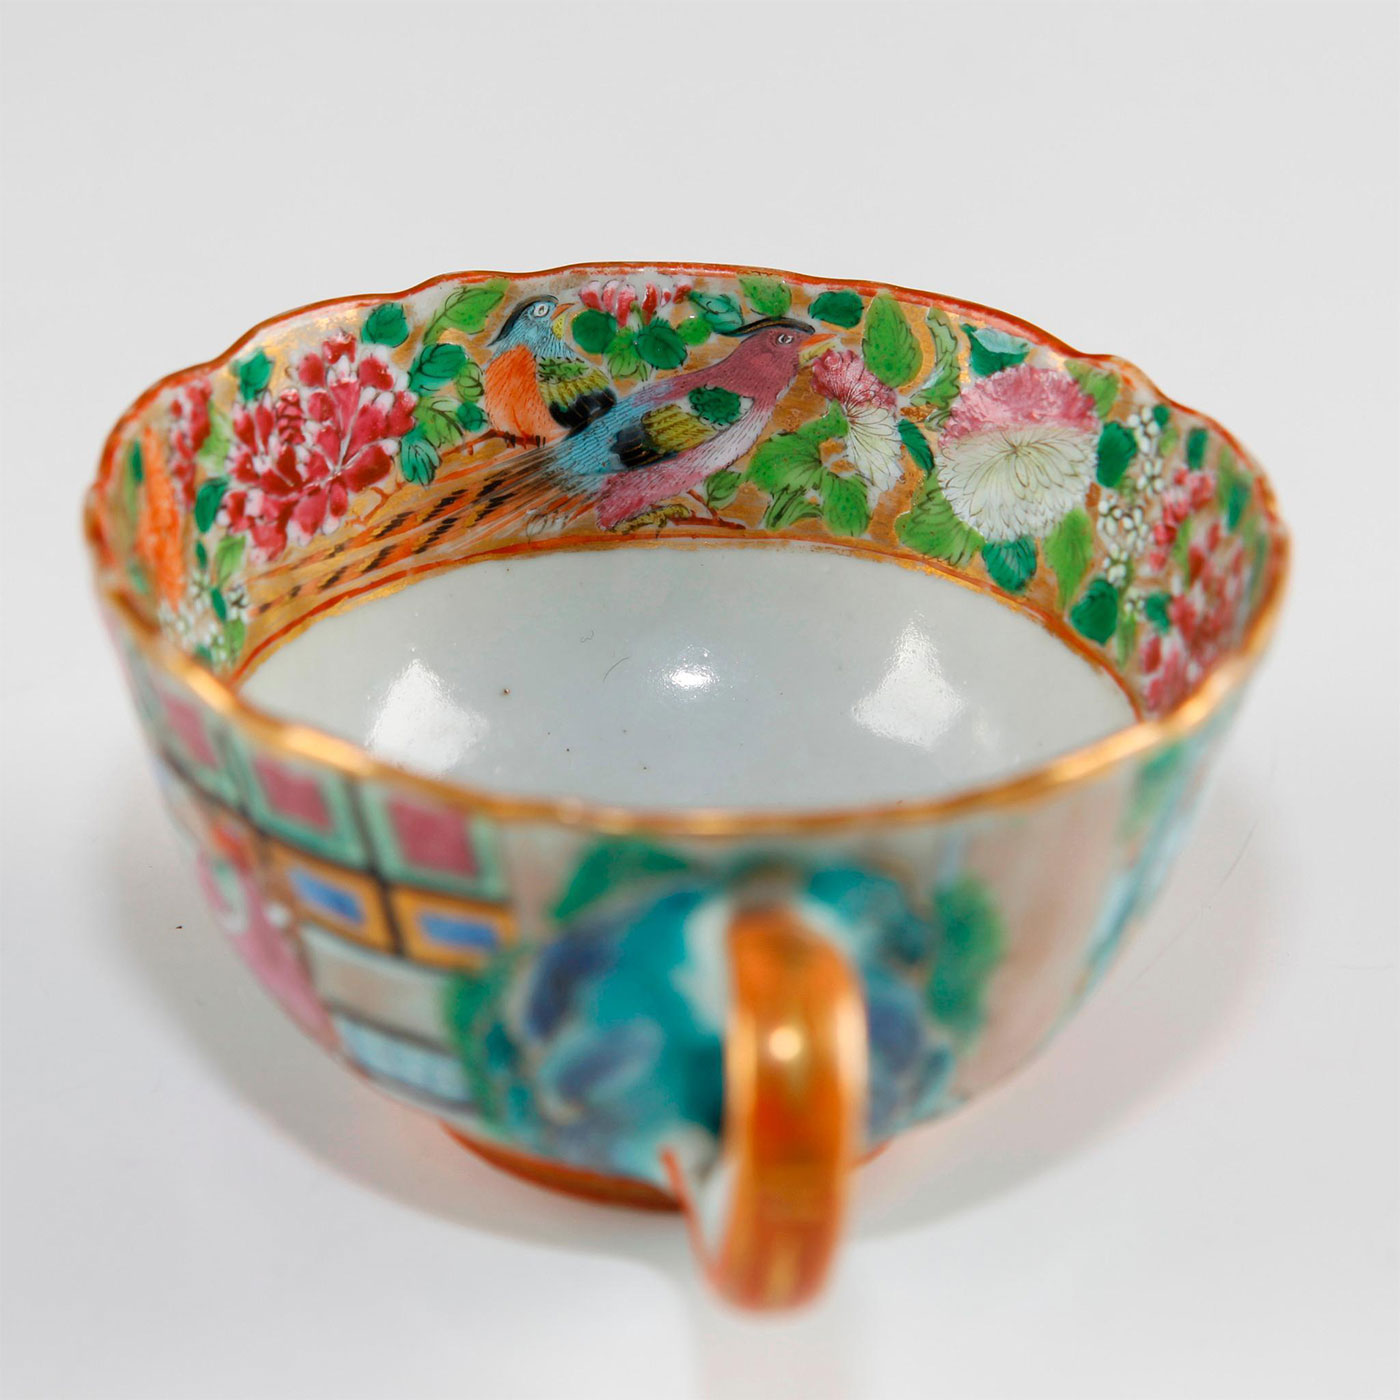 GILT AND COLOR GLAZED SCALLOPED CHINA TEACUP - Image 5 of 6